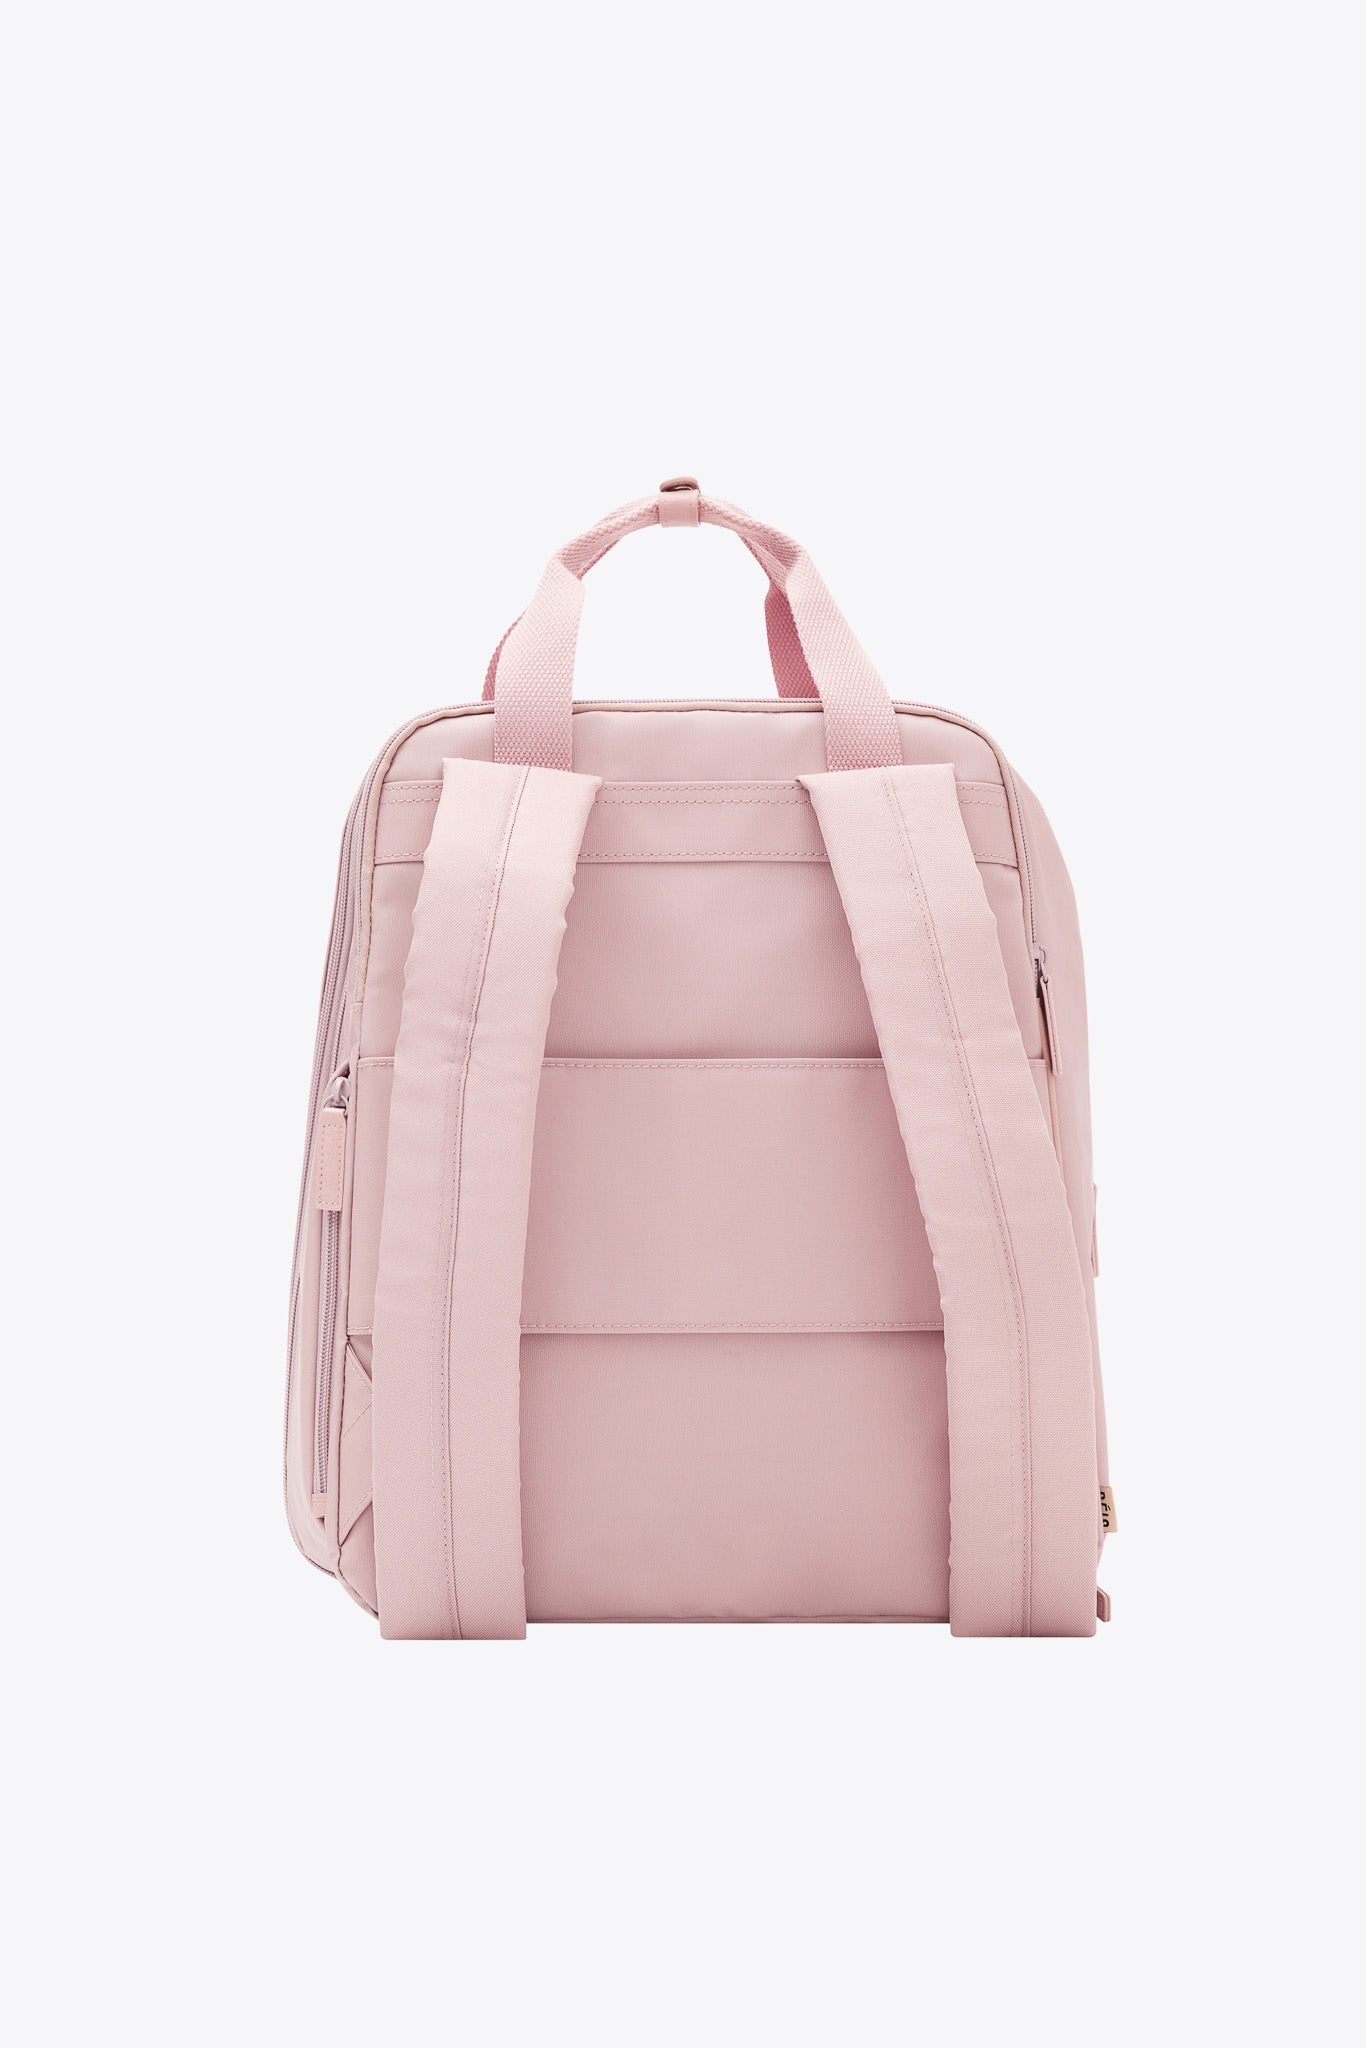 BÉIS 'The Expandable Backpack' in Atlas Pink - Expandable Travel ...